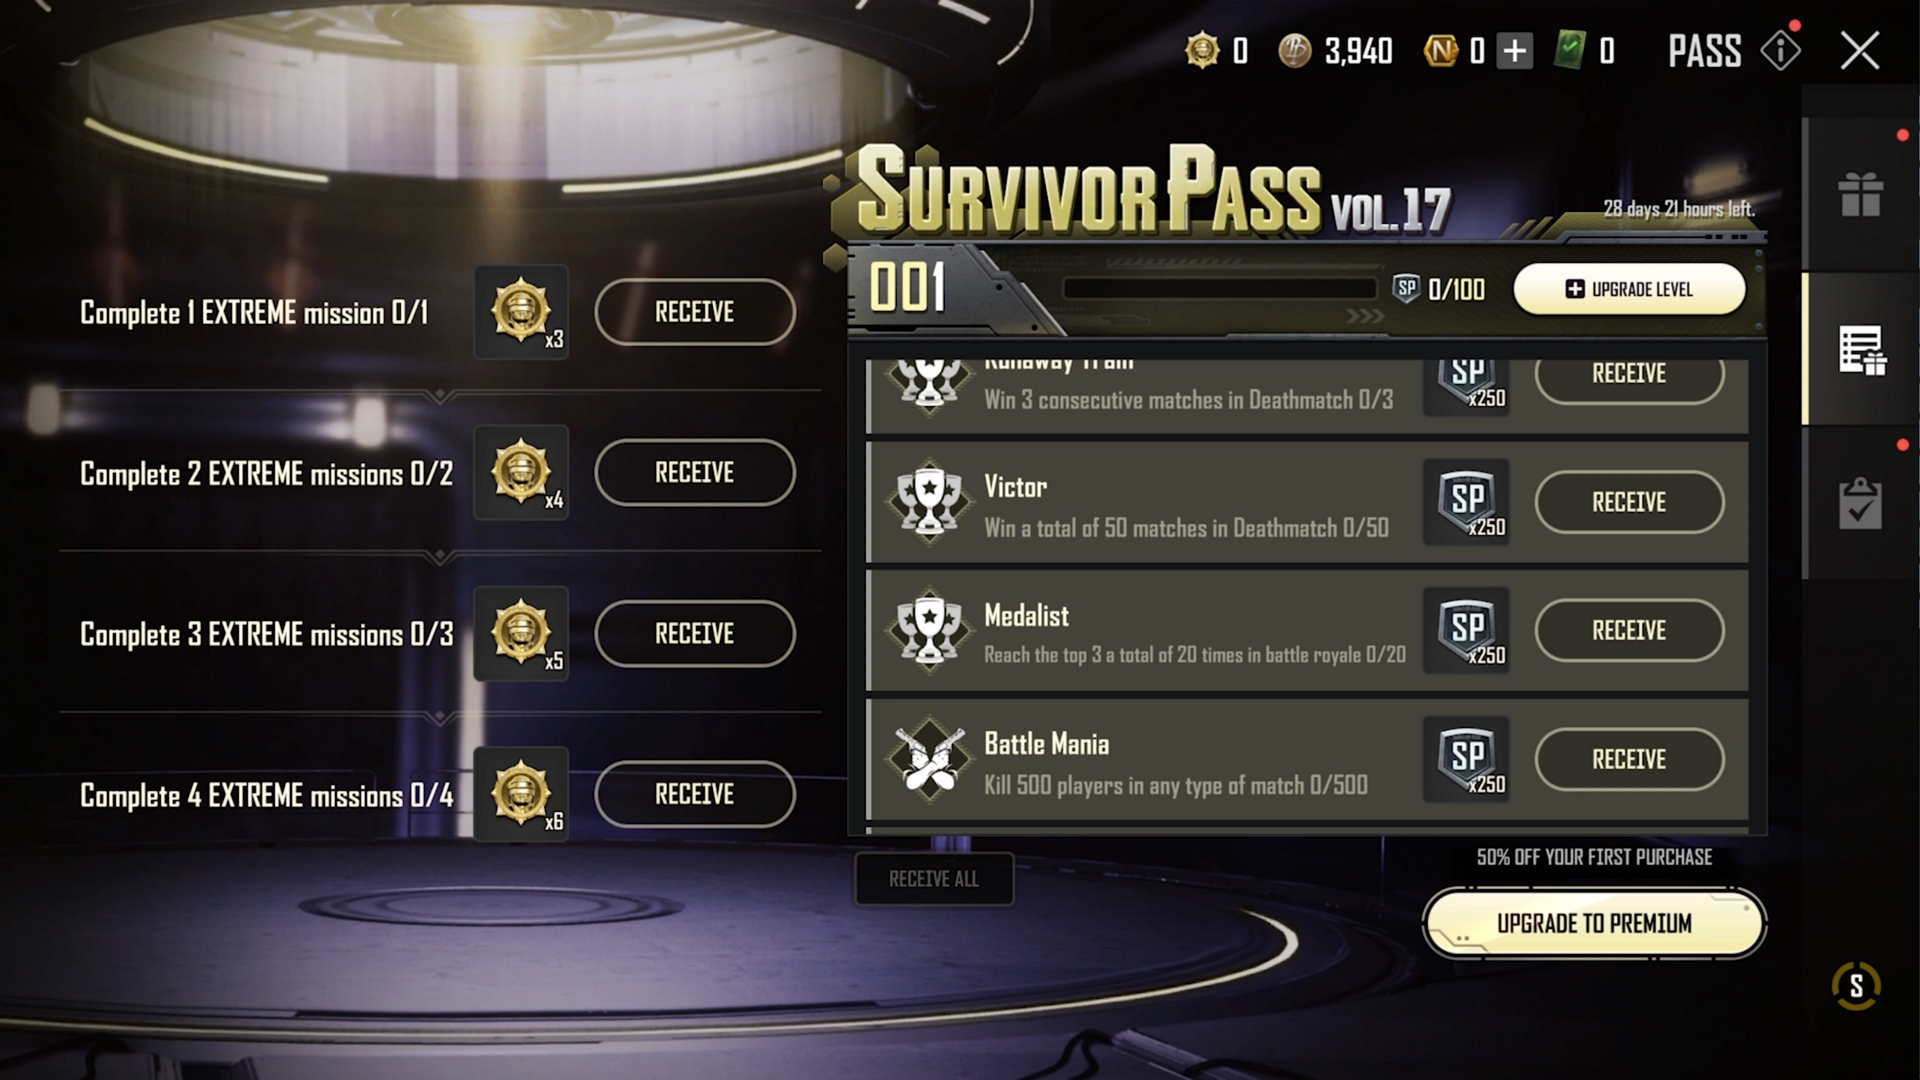 NEW STATE Mobile Survivor Pass VOL 17: Check out the rewards and more on PUBG NEW STATE Survivor Pass Vol 17